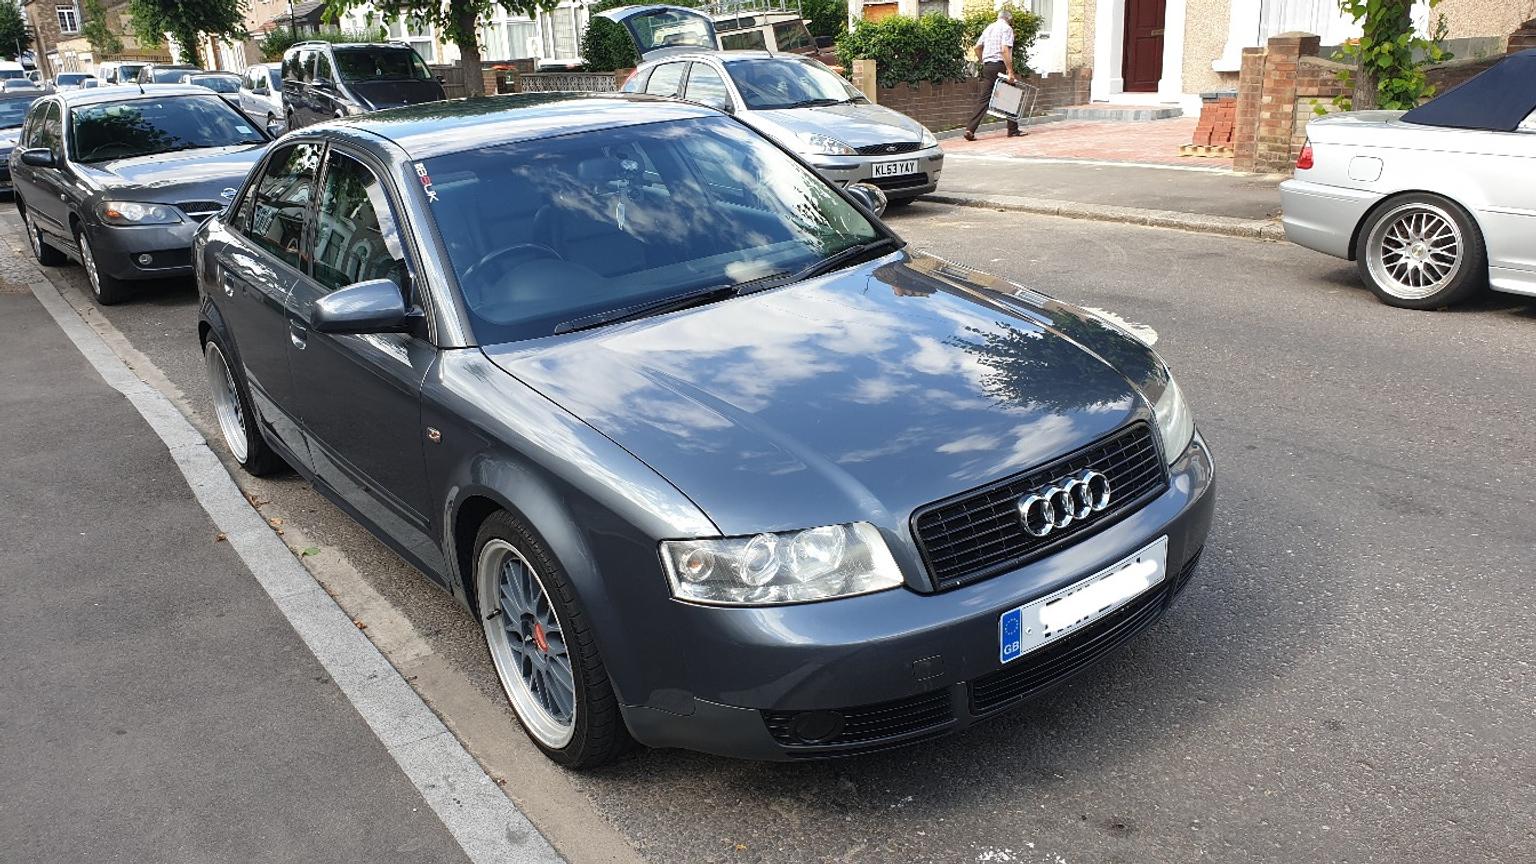 Audi A4 1 8t B6 Dolphin Grey In E12 London Borough Of Newham